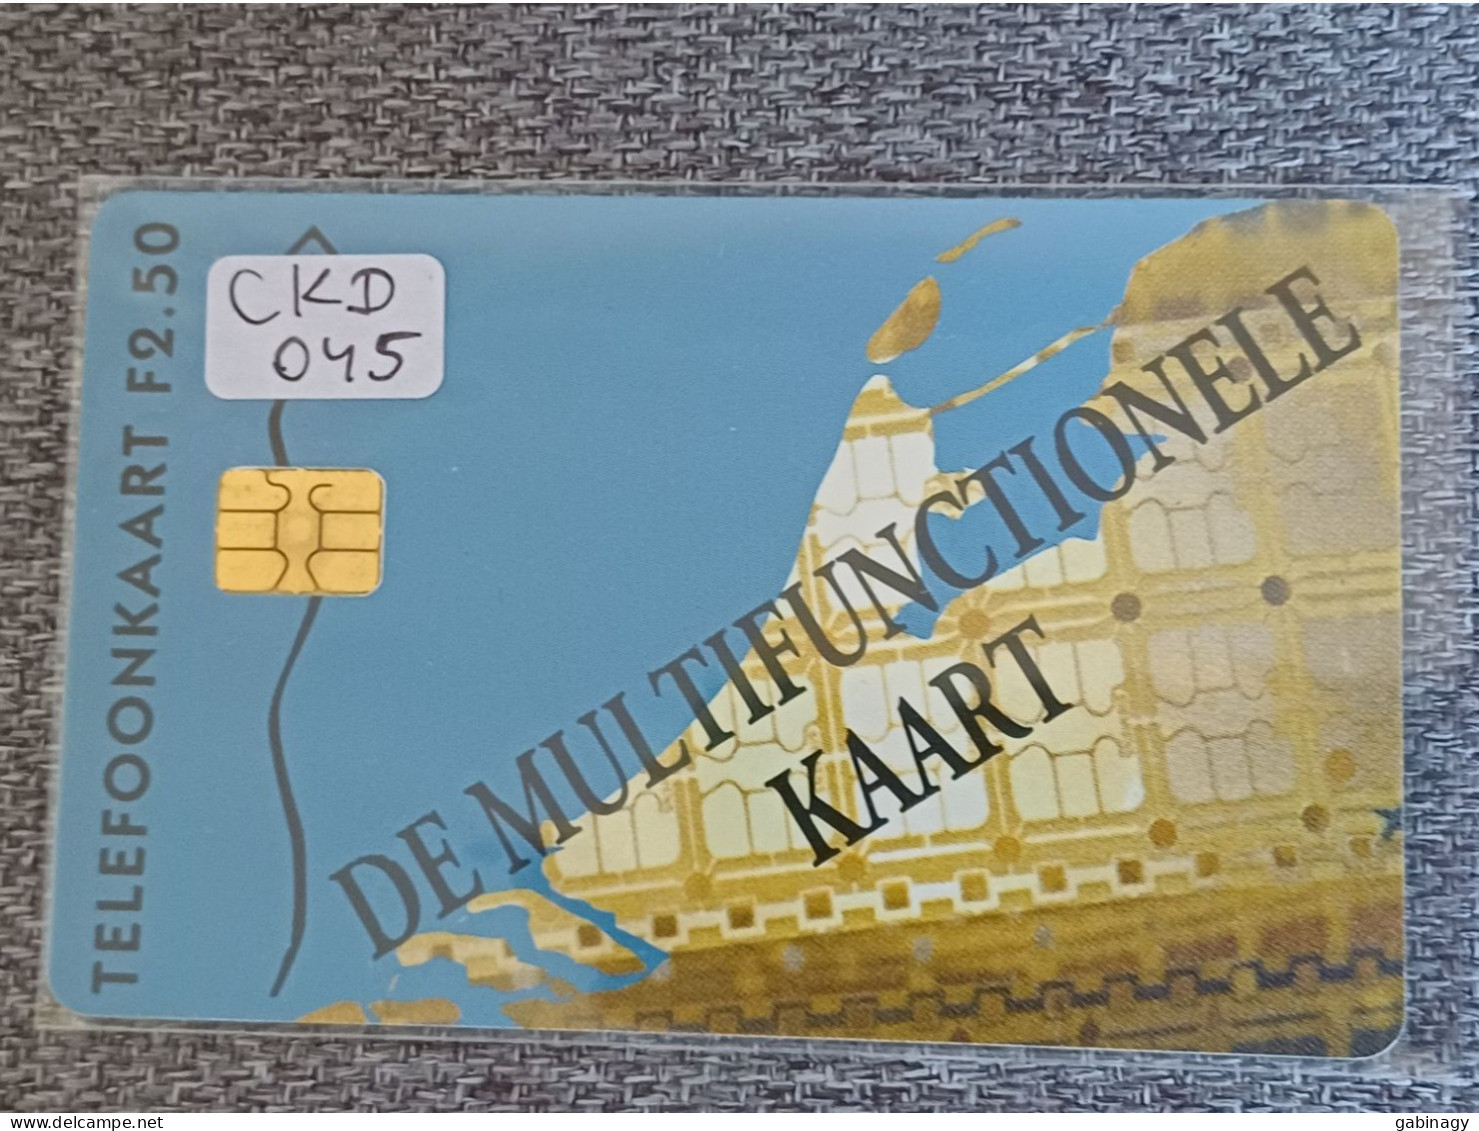 NETHERLANDS - CKD045 - National Chipcard Congress - 4.600EX. - Private